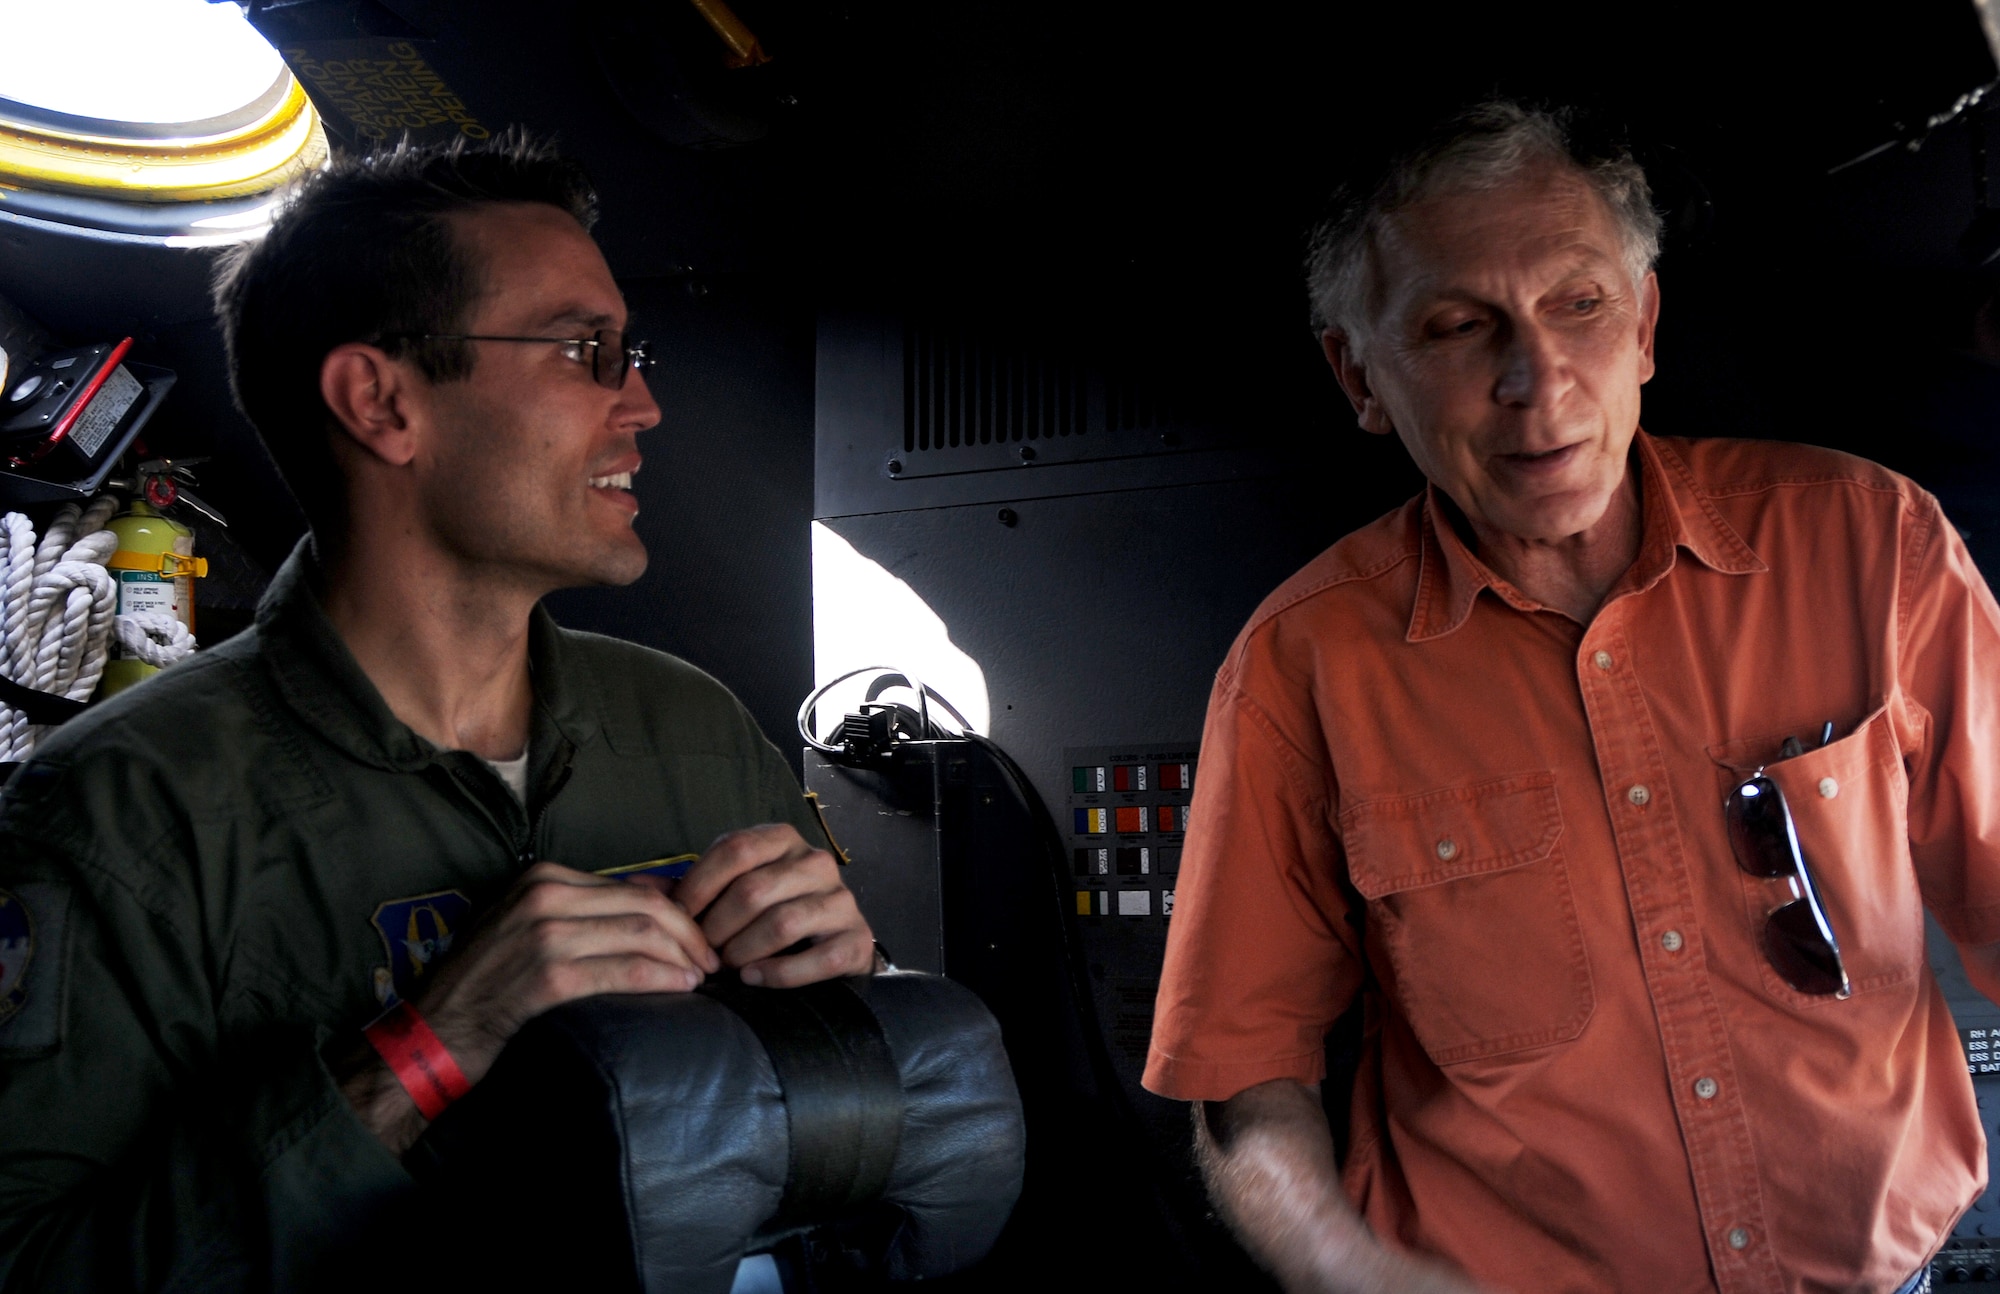 1st Lt. Anthony Toste, 700th Airlift Squadron C-130 pilot, and Brian Shuler, a Marietta, Ga. and former C-130 crew member, tell old war stories in the cockpit of a U.S. Air Force C-130 Hercules from Dobbins Air Reserve Base, Ga. Oct. 18, 2014, at the Wings over North Georgia air show in Rome, Ga. The static display was brought to WONG to help visitors better understand the capabilities of the 94th Airlift Wing. (U.S. Air Force photo by Senior Airman Daniel Phelps/Released)